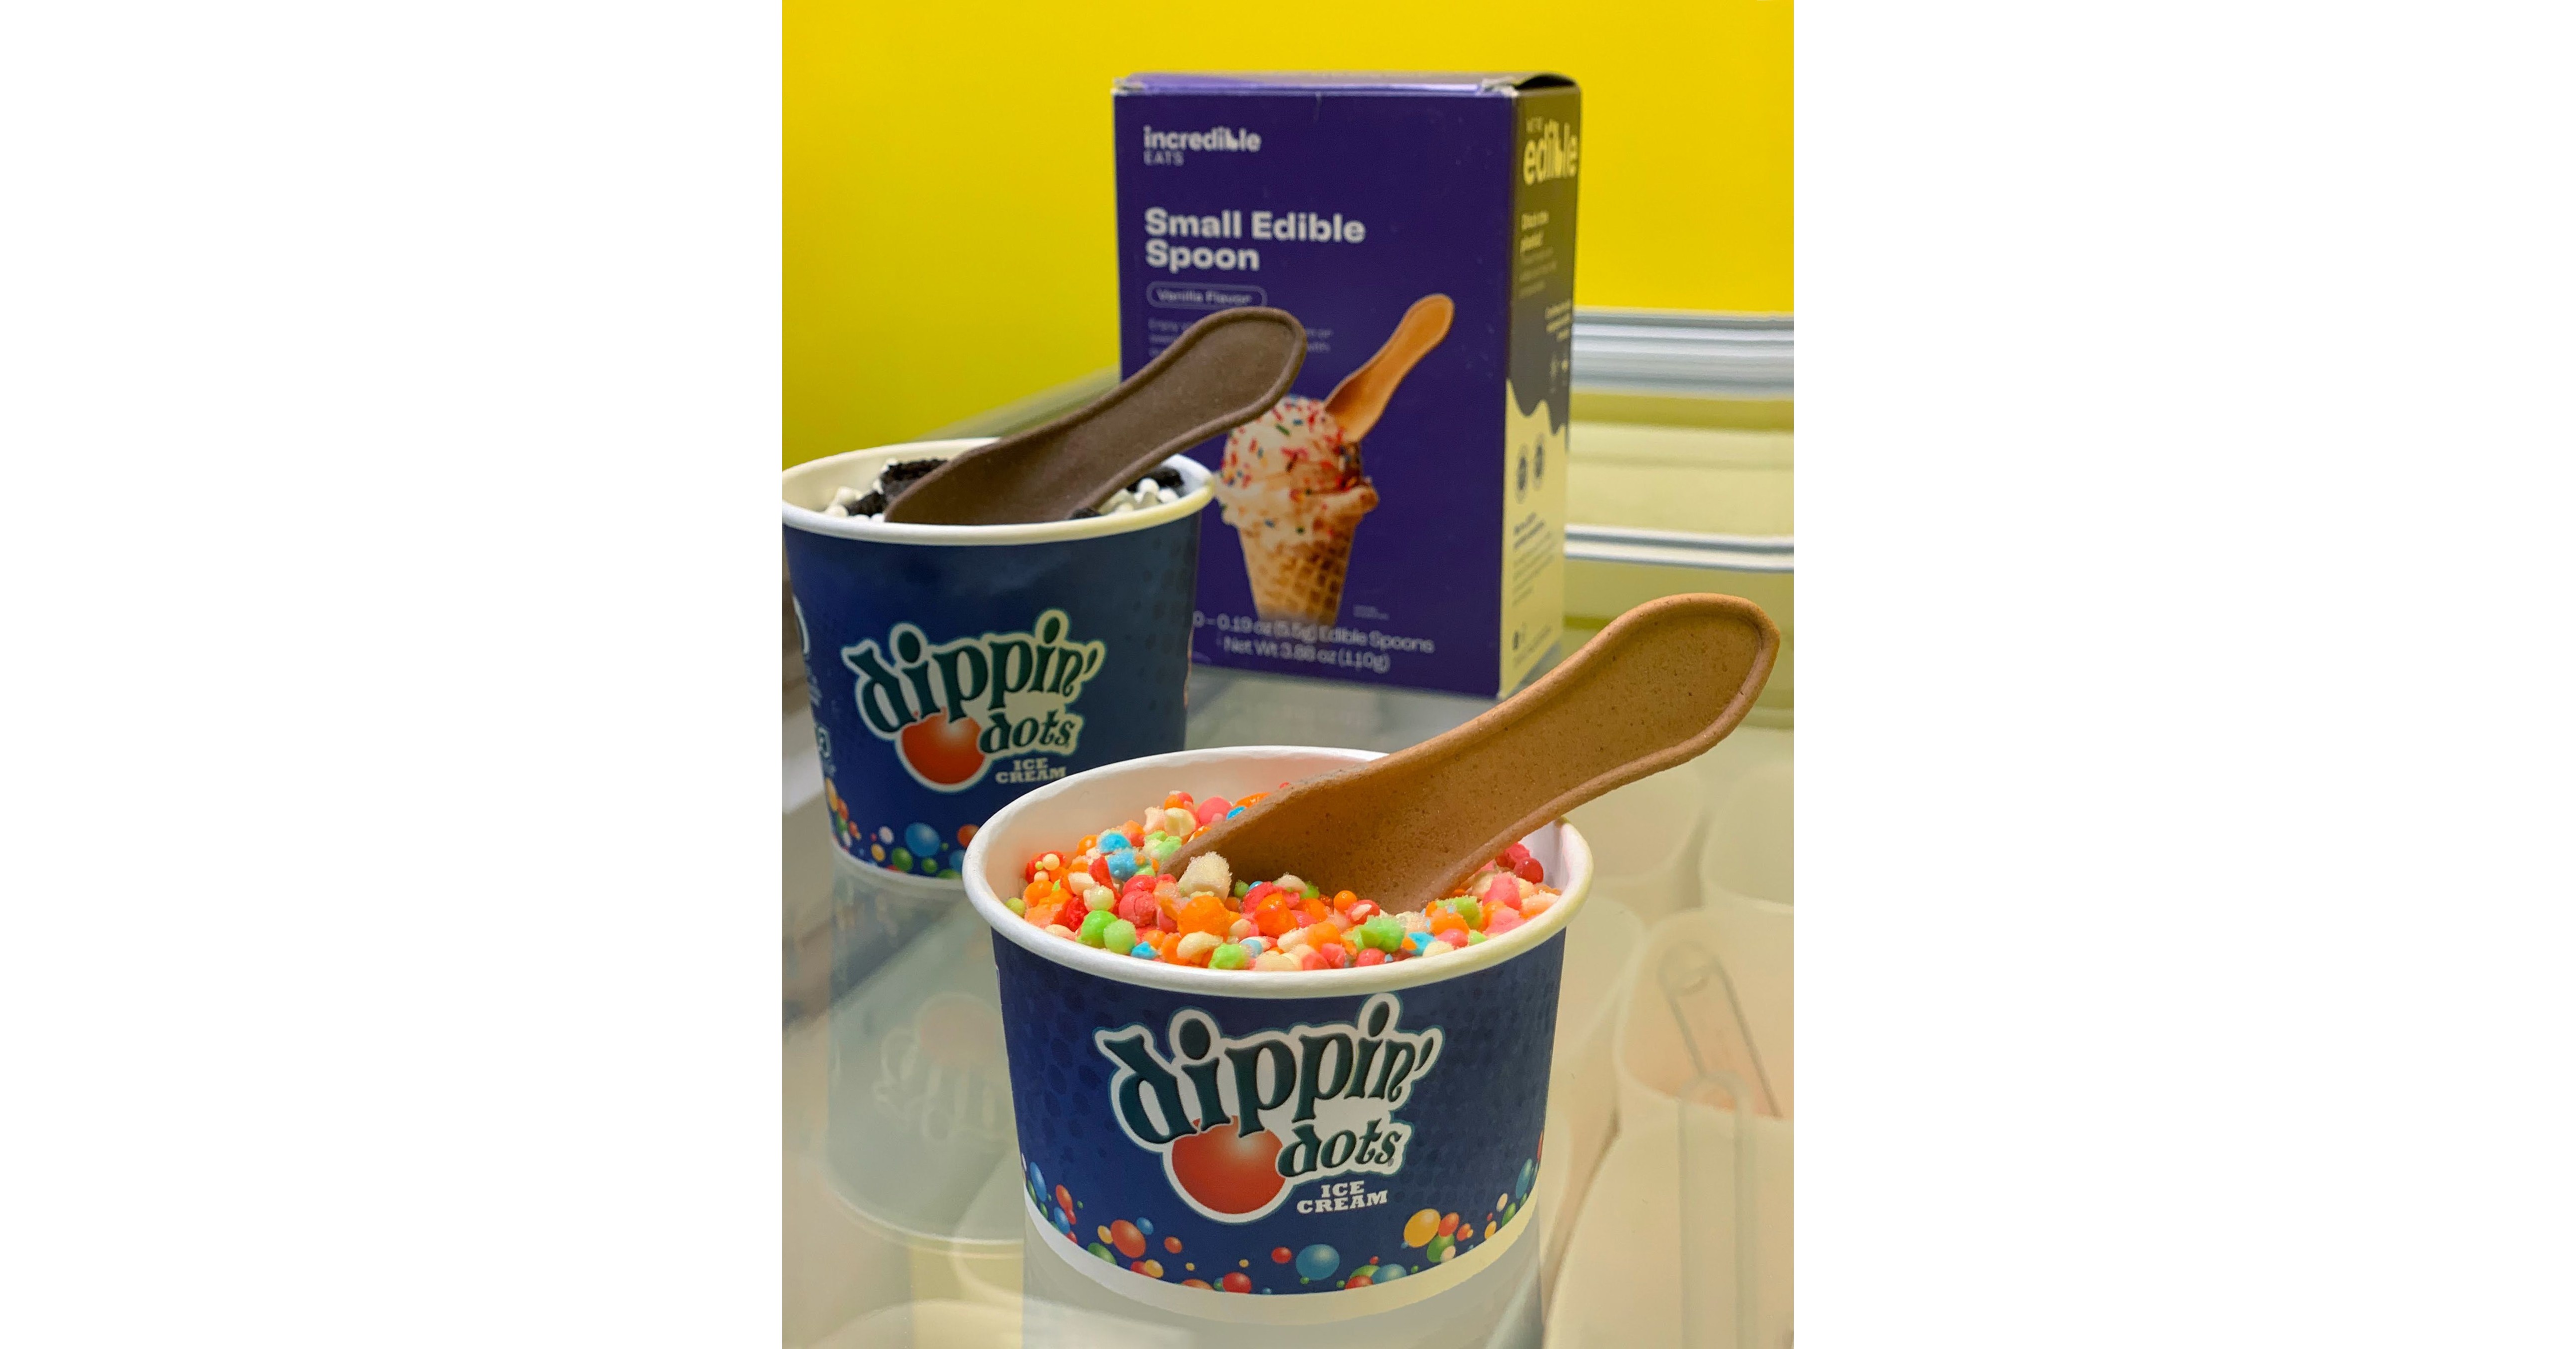 Dippin' Dots Begins Roll Out of Edible Spoons from IncrEDIBLE Eats